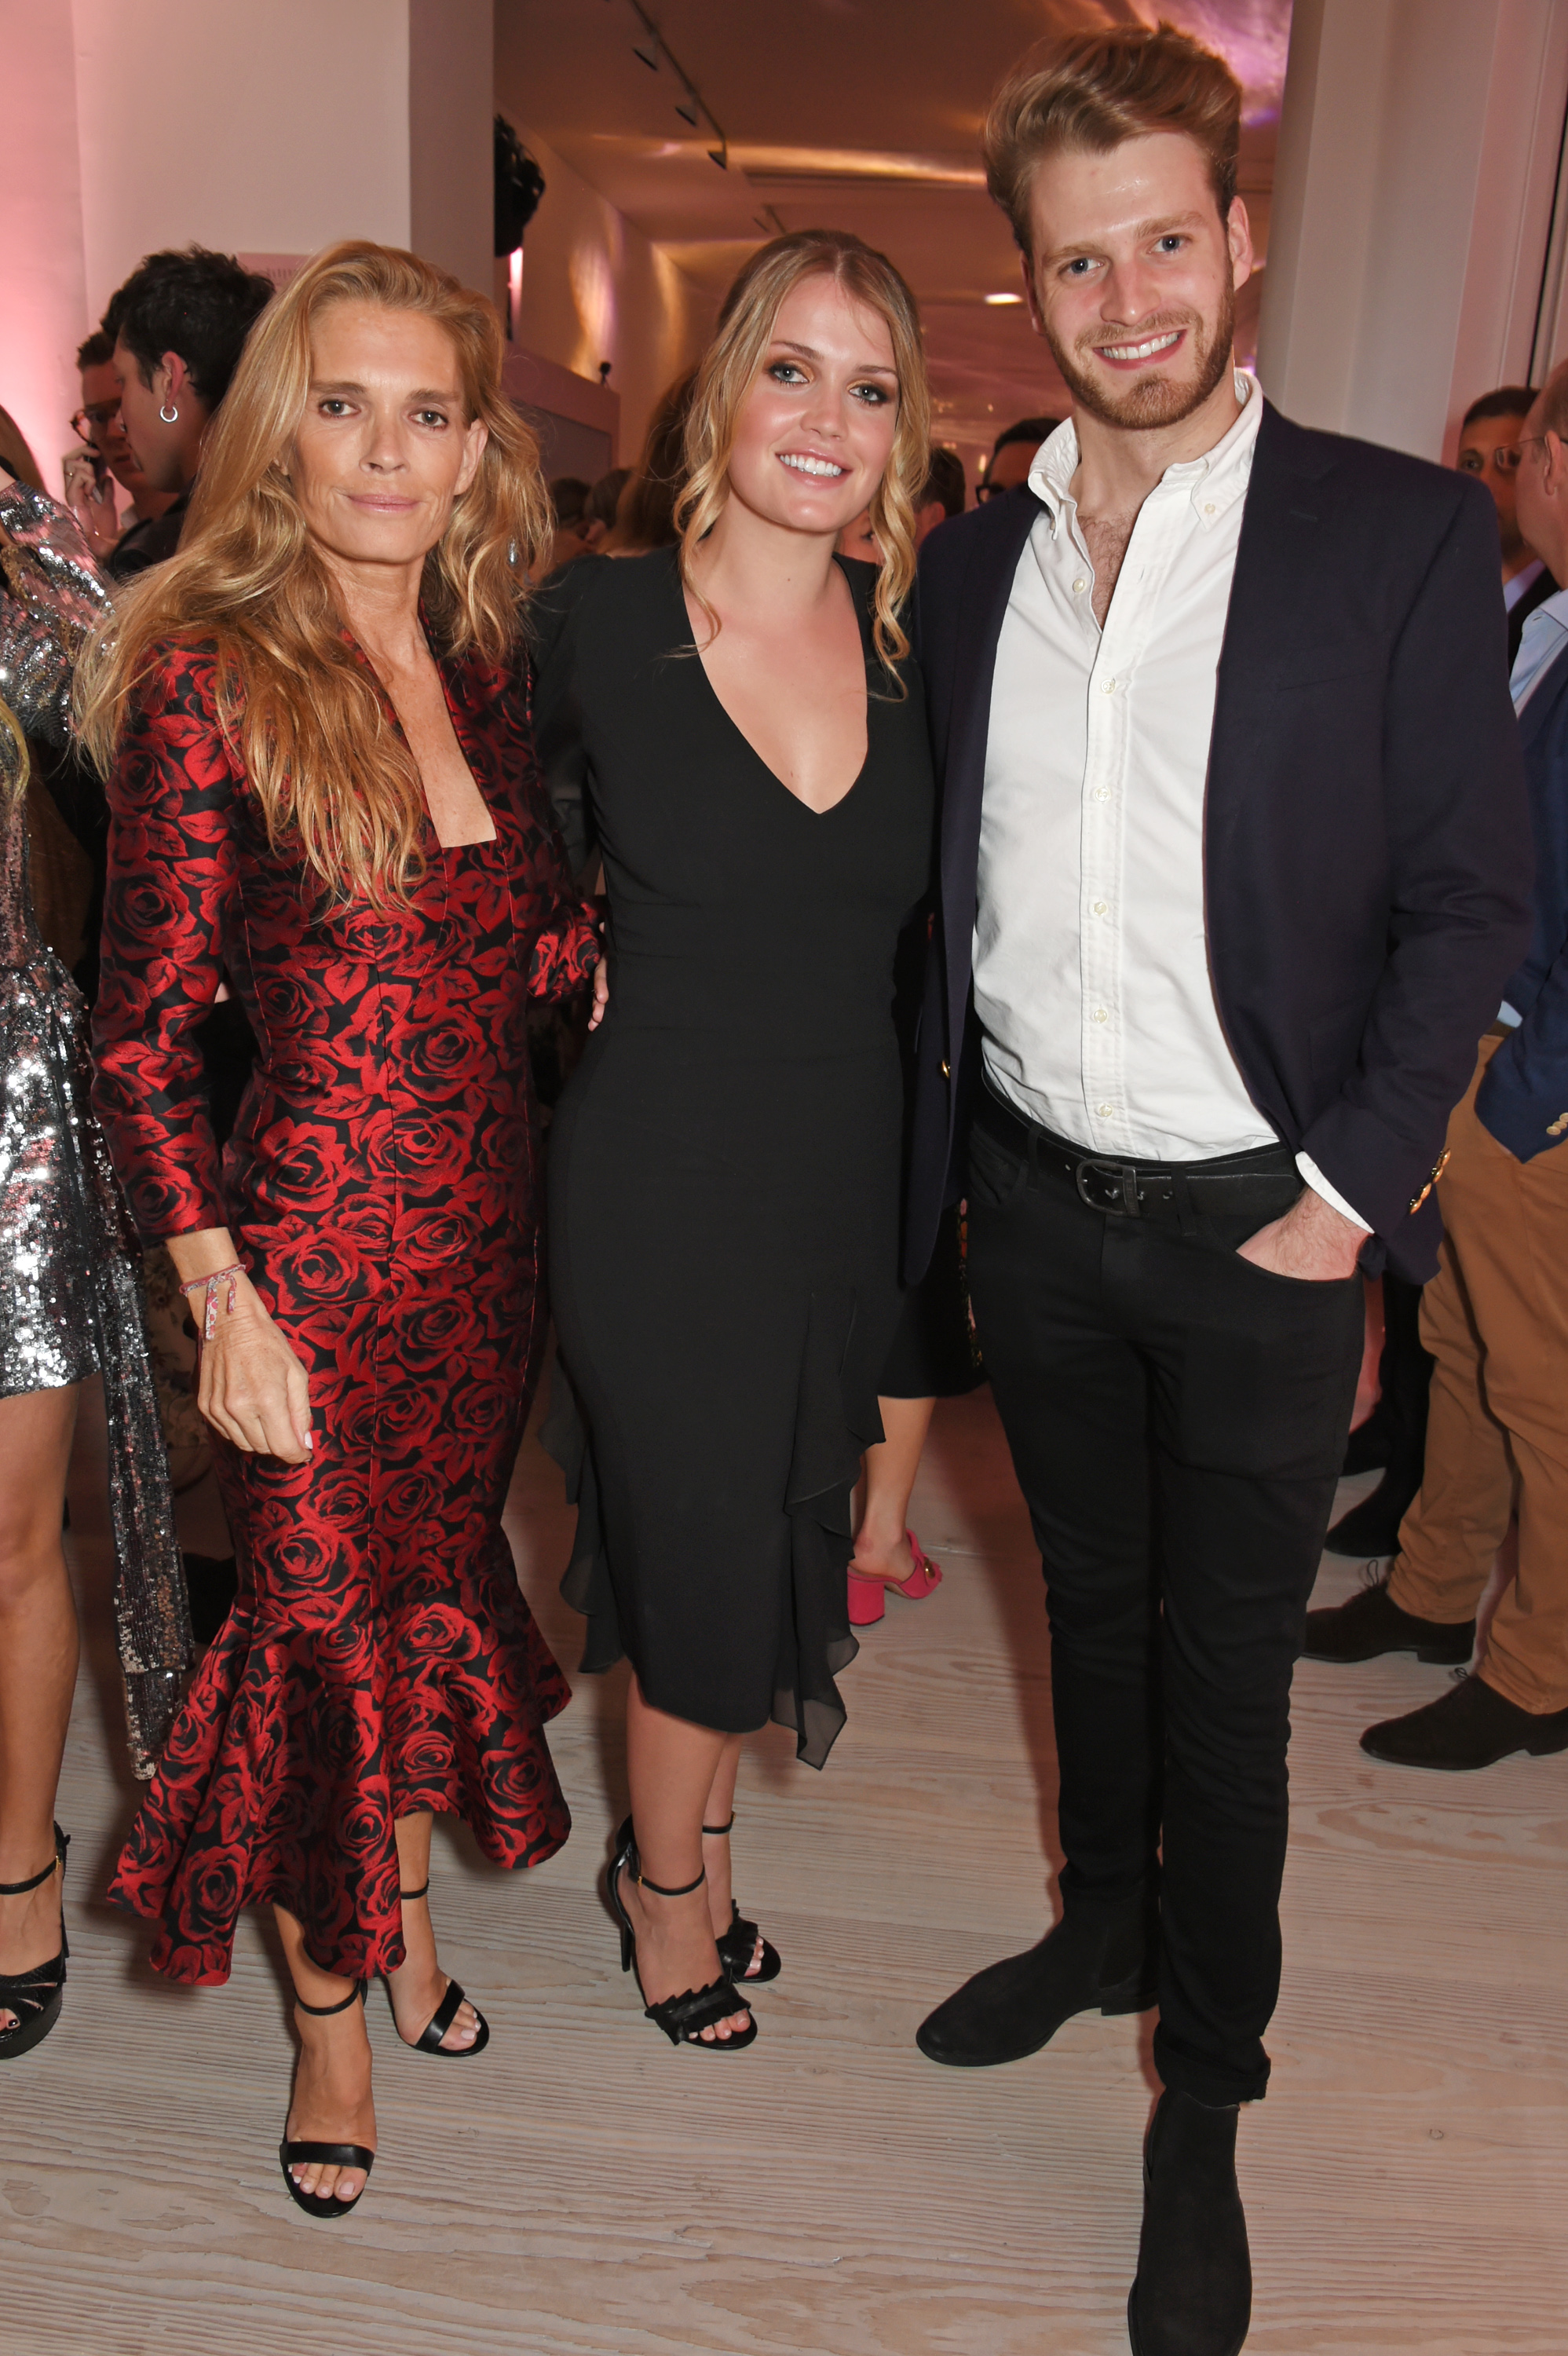 Victoria Aitken, Lady Kitty Spencer and Louis Spencer attend Tatler's English Roses 2017 in association with Michael Kors at the Saatchi Gallery on June 29, 2017 in London, England. | Source: Getty Images